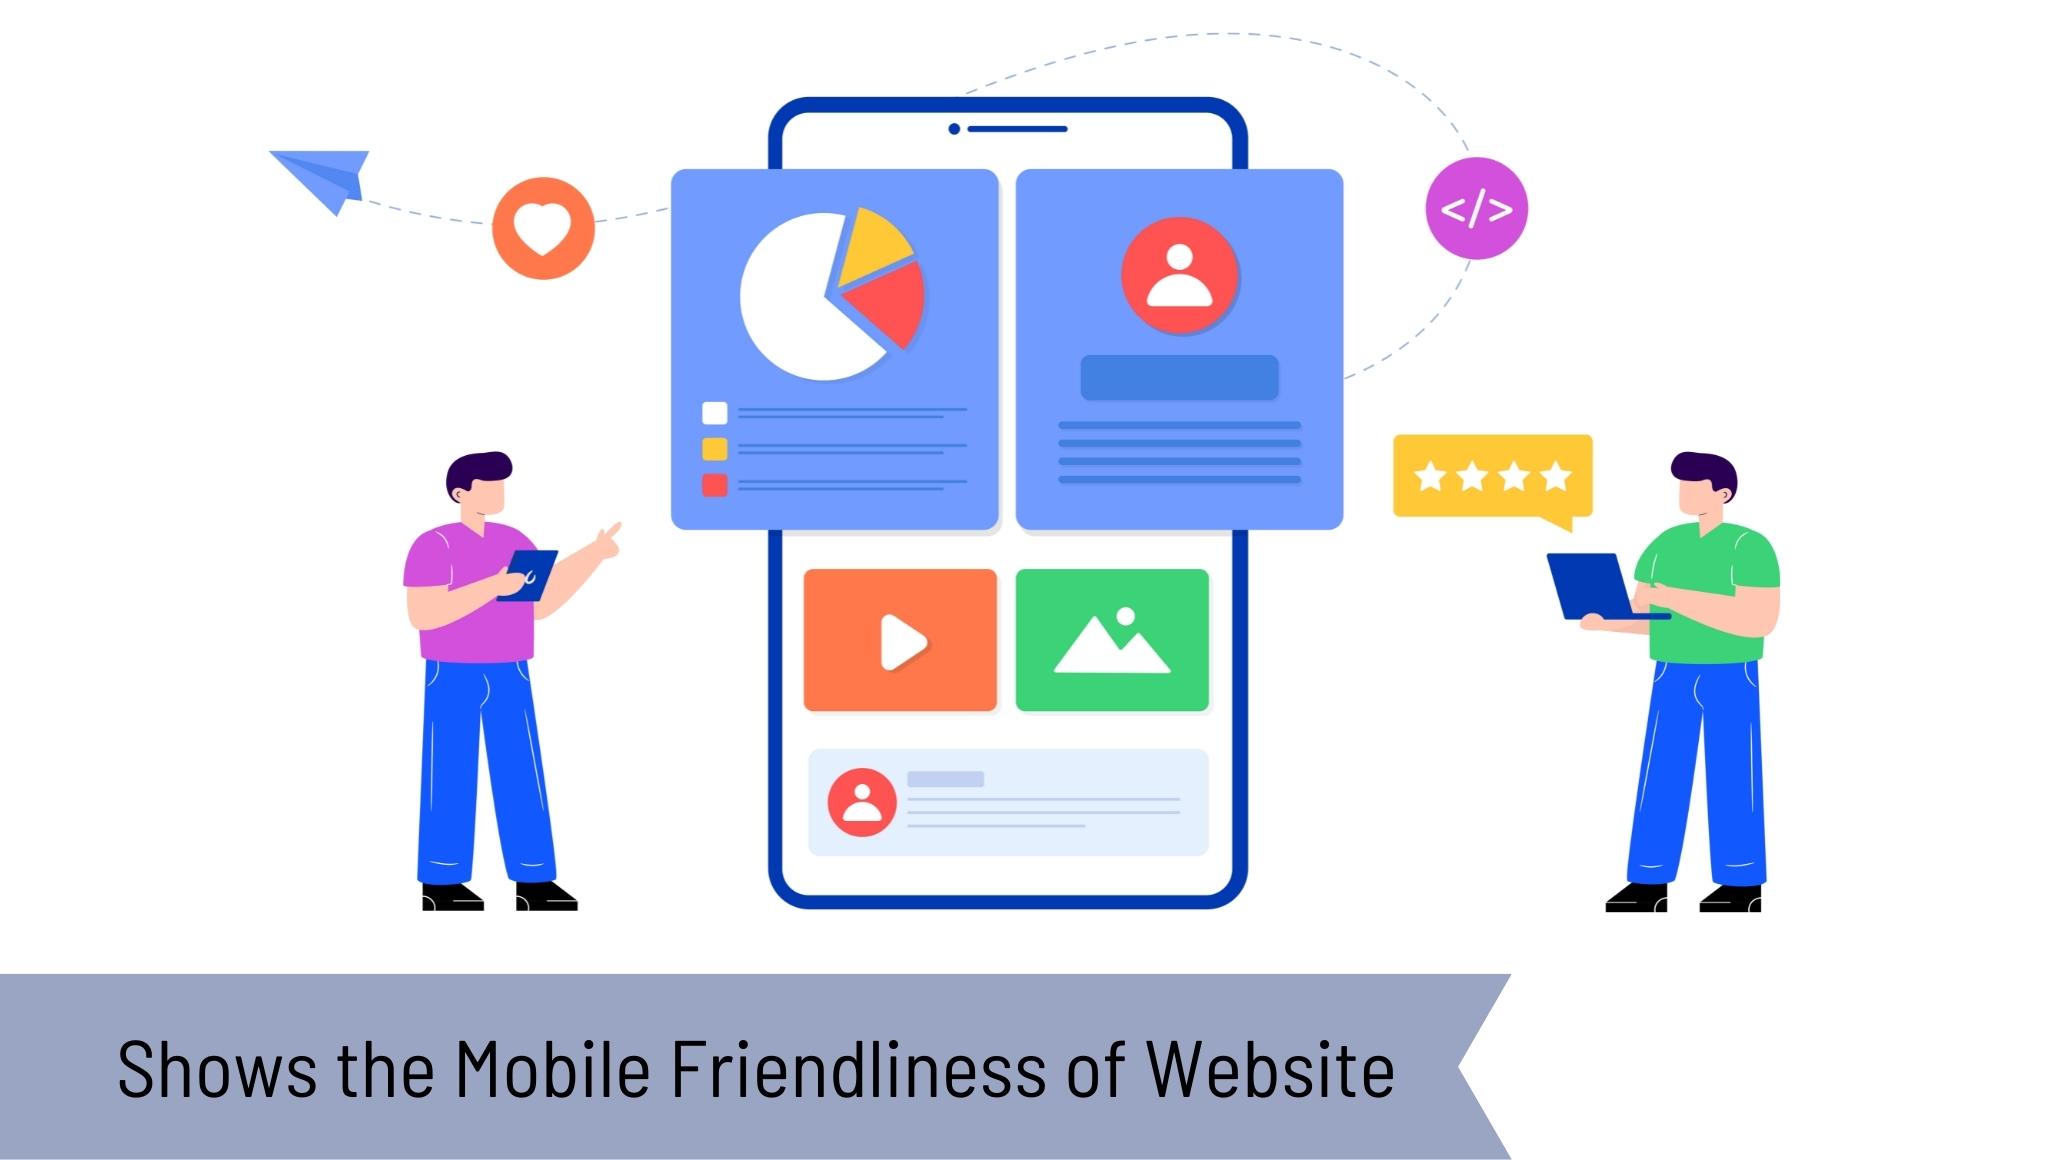 You will know the level of mobile friendliness you need to achieve